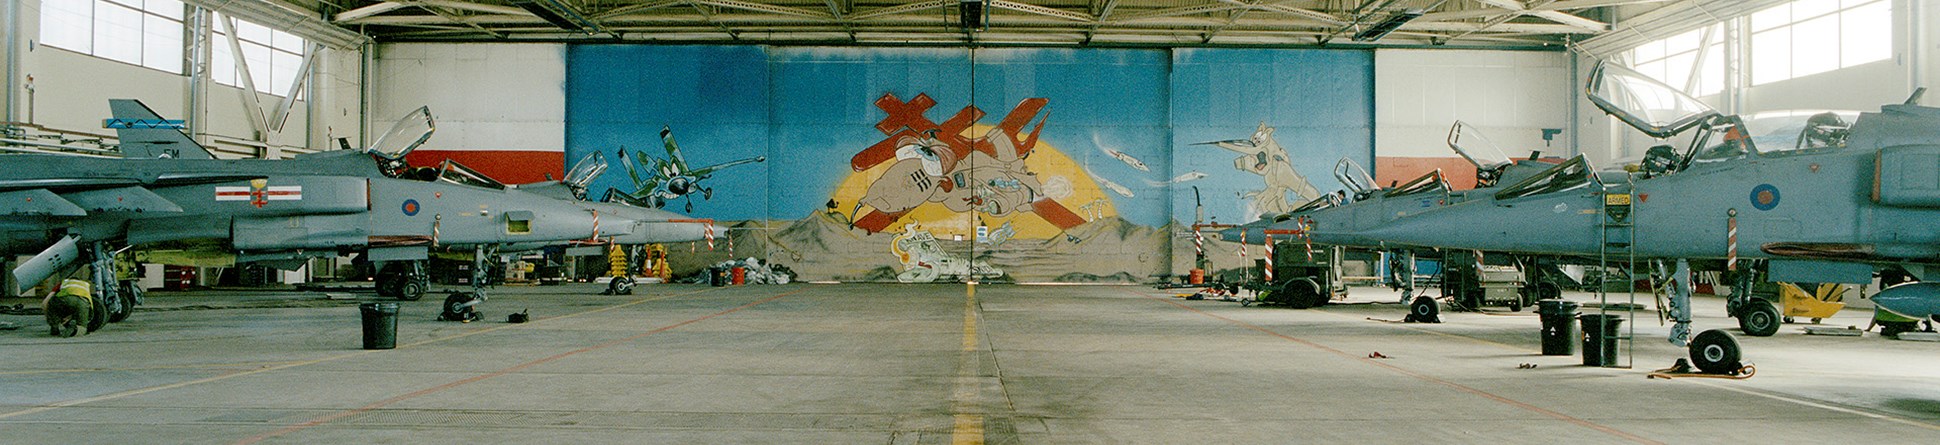 RAF Coltishall, Norfolk, Hangar 1 with a large picture of a double armed Cross of Lorraine taken from 41 Squadron’s badge painted on the hangar’s doors.